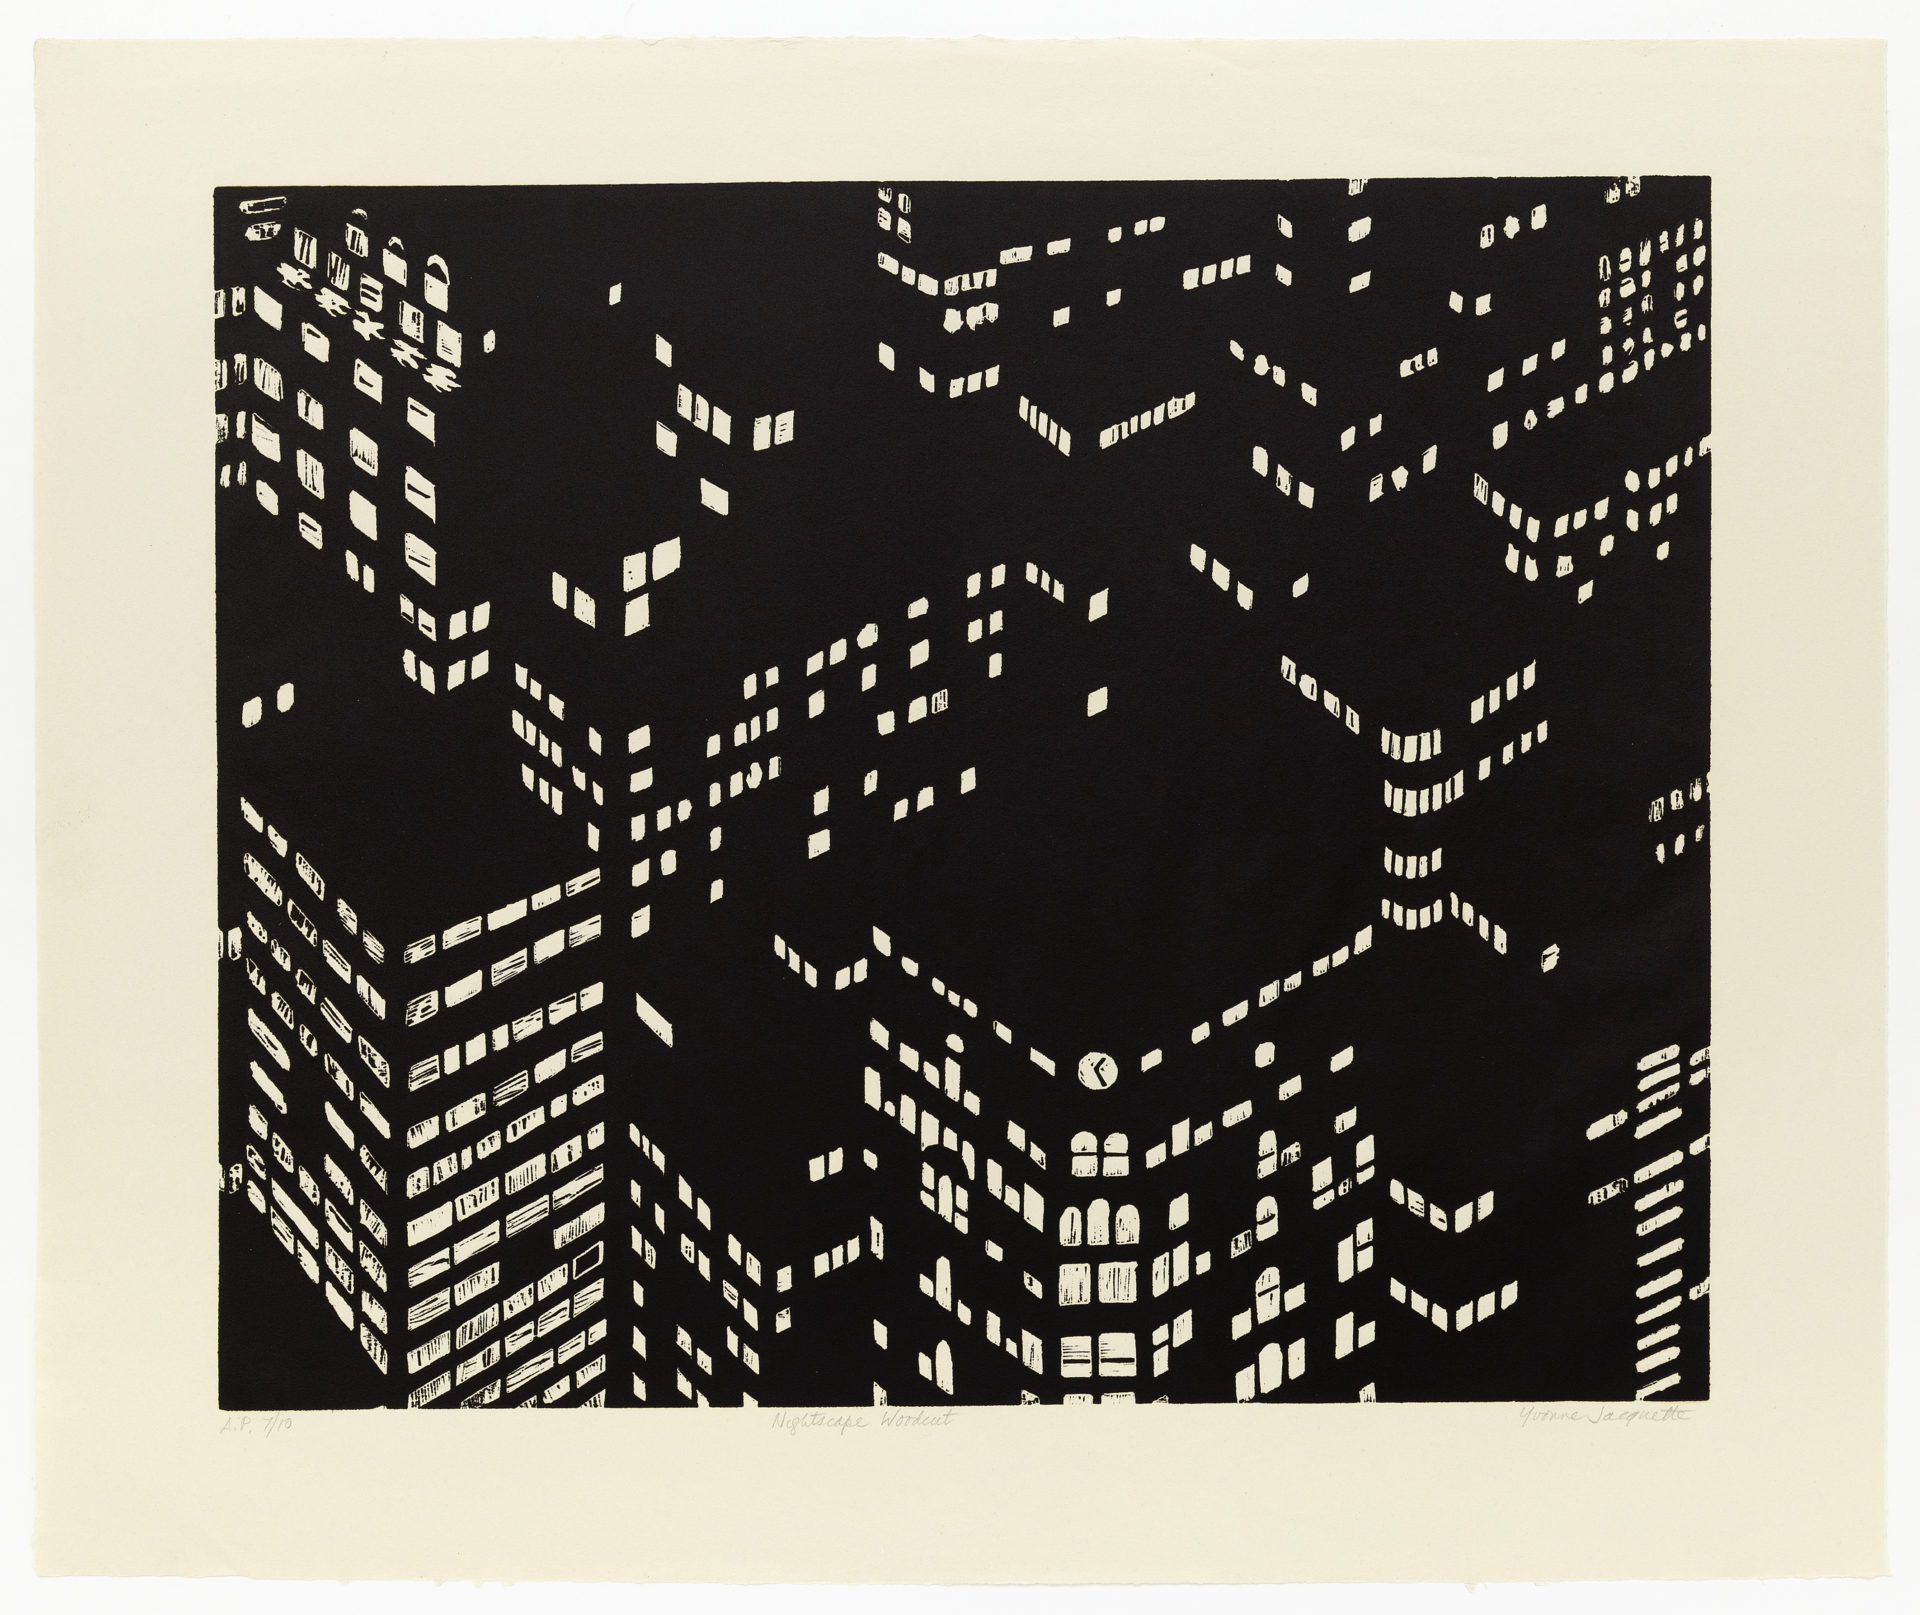 Nightscape Woodcut, 1998, Woodcut, 20 x 24 5/8 inches (50.8 x 62.5 cm), Edition of 10